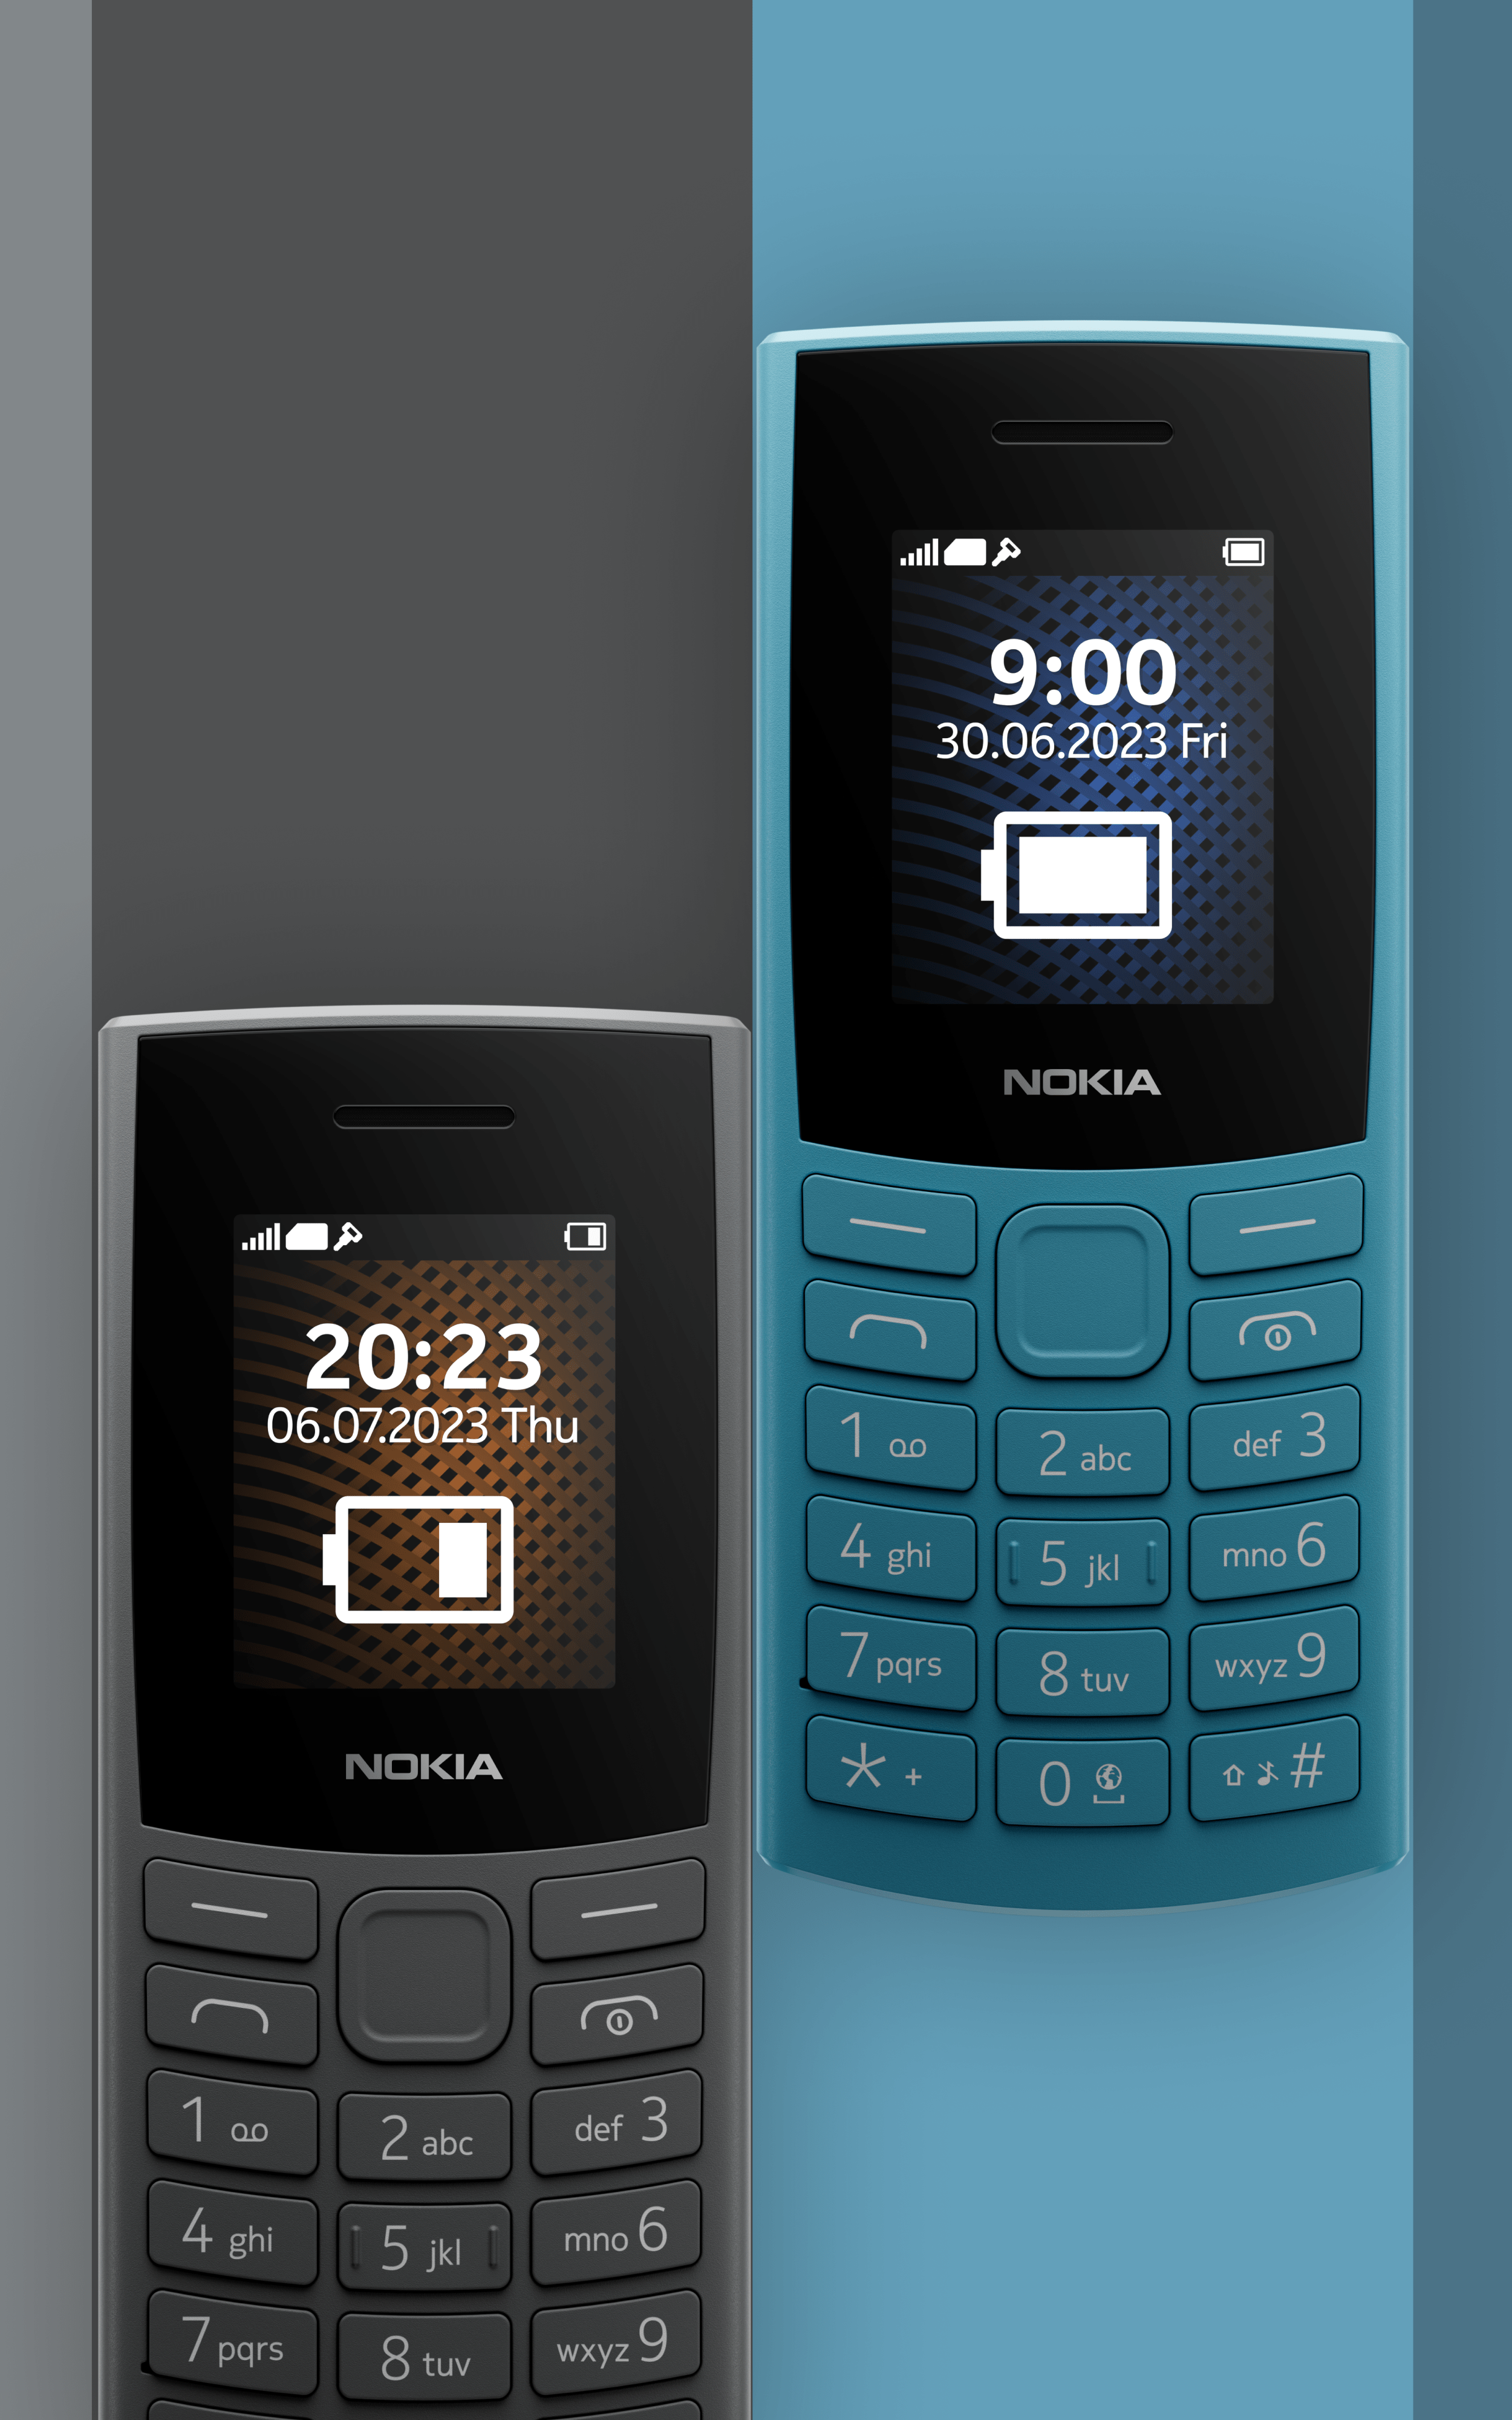 Nokia 105 feature phone internet 4G with